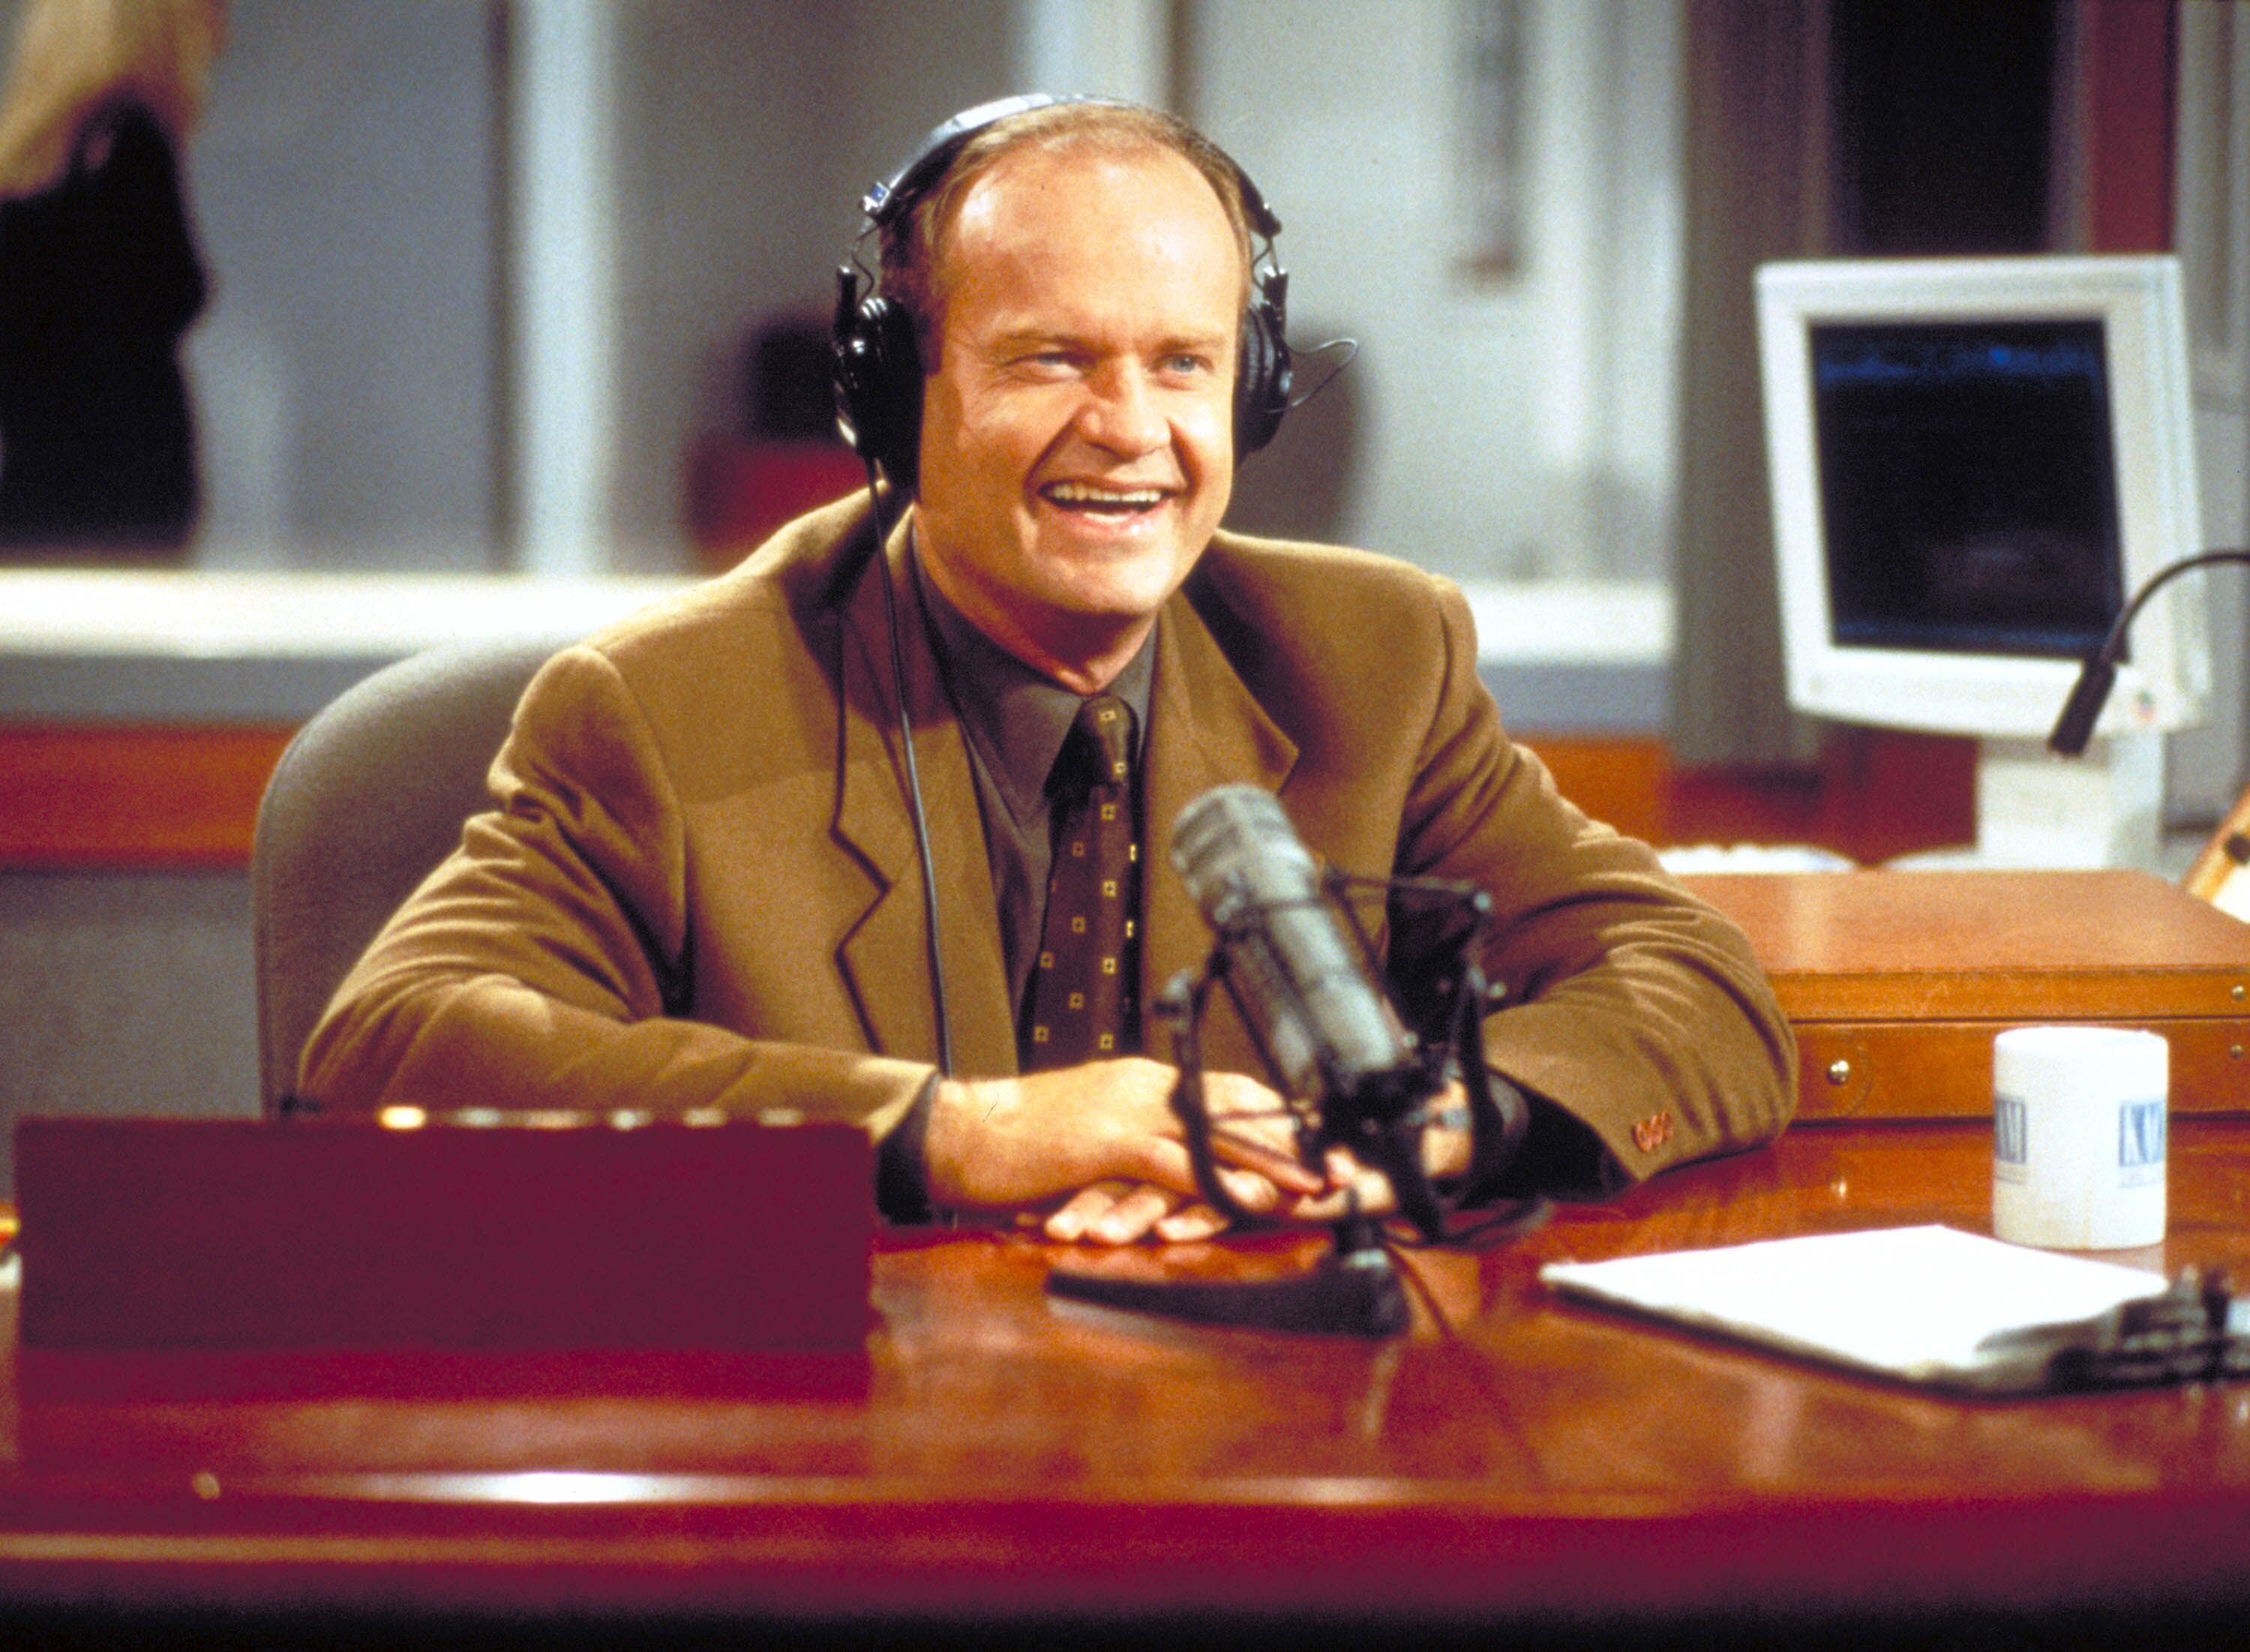  Kelsey Grammer as Frasier Crane in NBC's television comedy series "Frasier" circa 1993 | Source: Getty Images